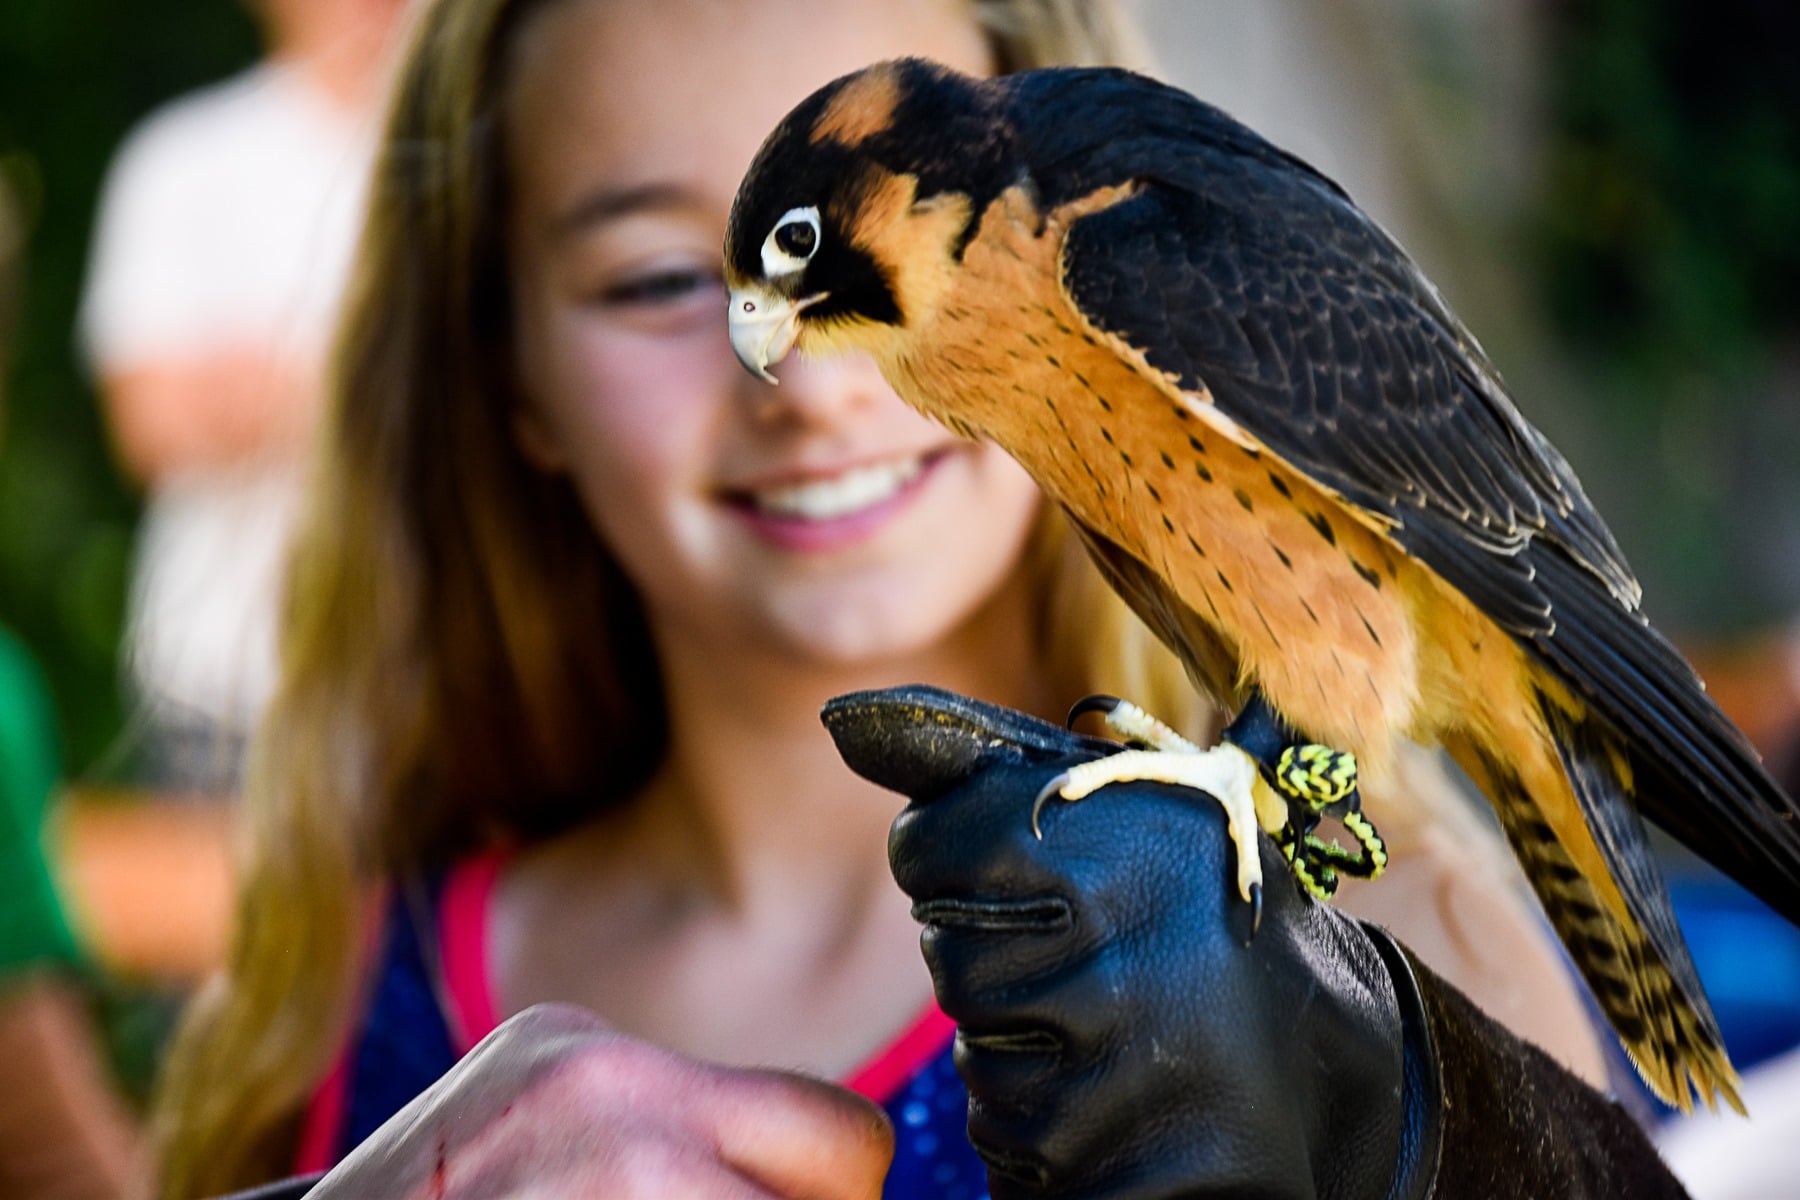 Child watches a trained falcon up close